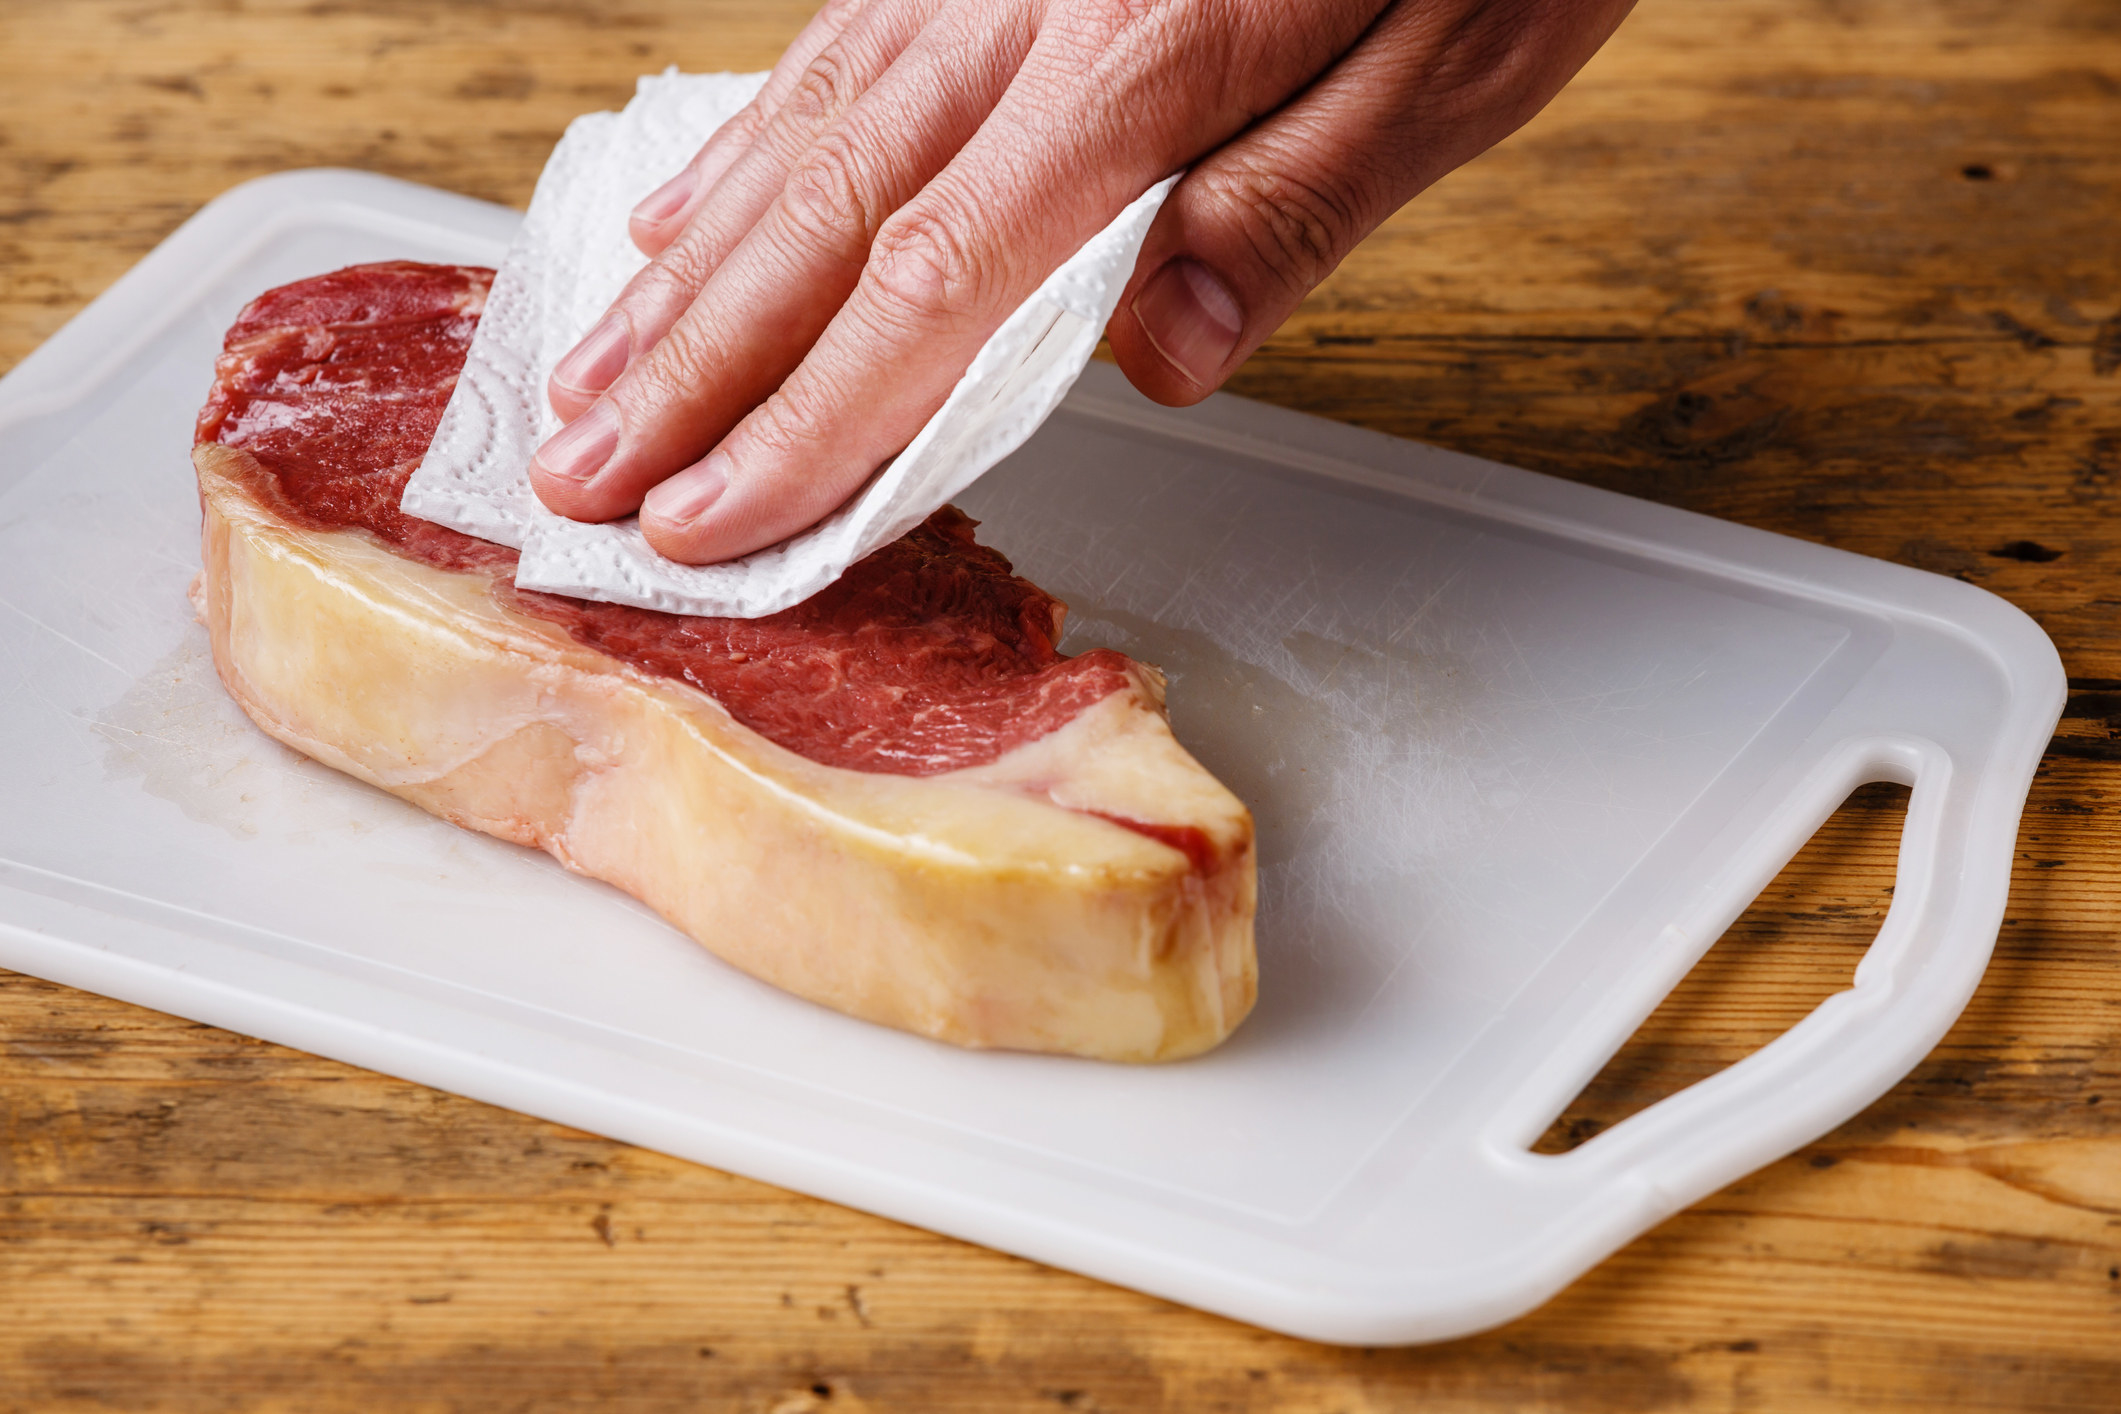 Patting steak dry with paper towel.